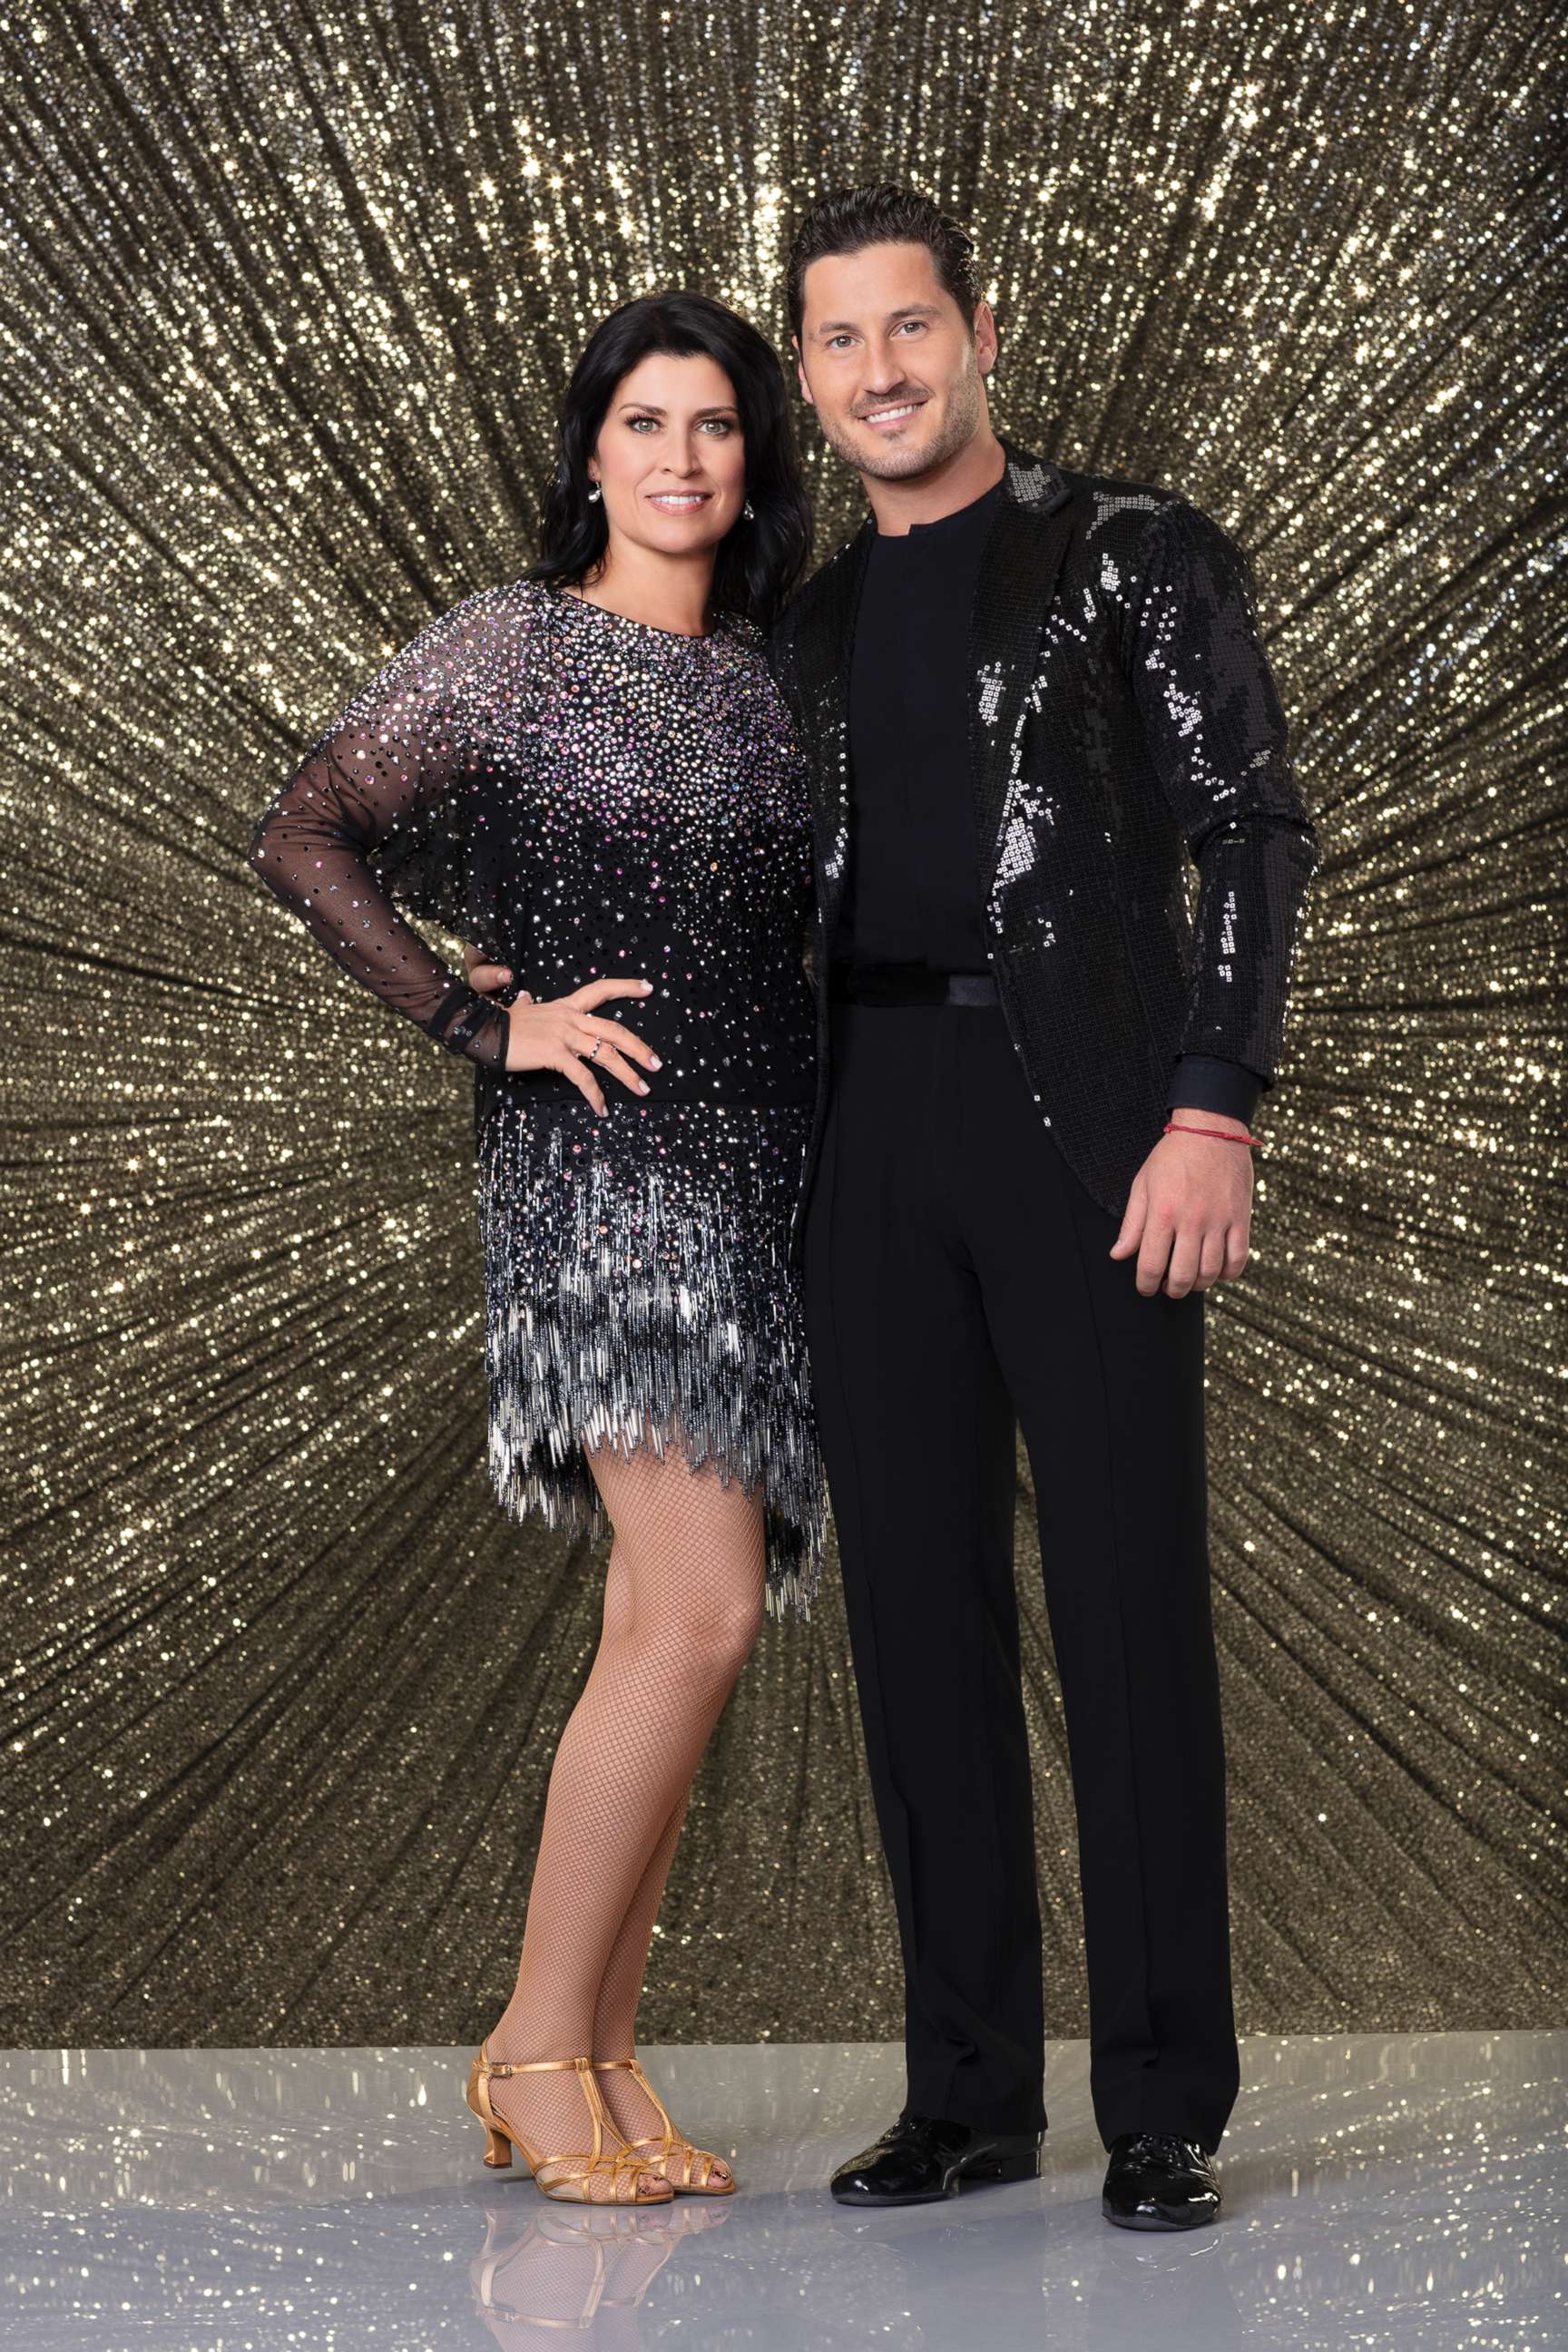 PHOTO: Nancy Mckeon and Val Chmerkovskiy will appear on "Dancing with the Stars."